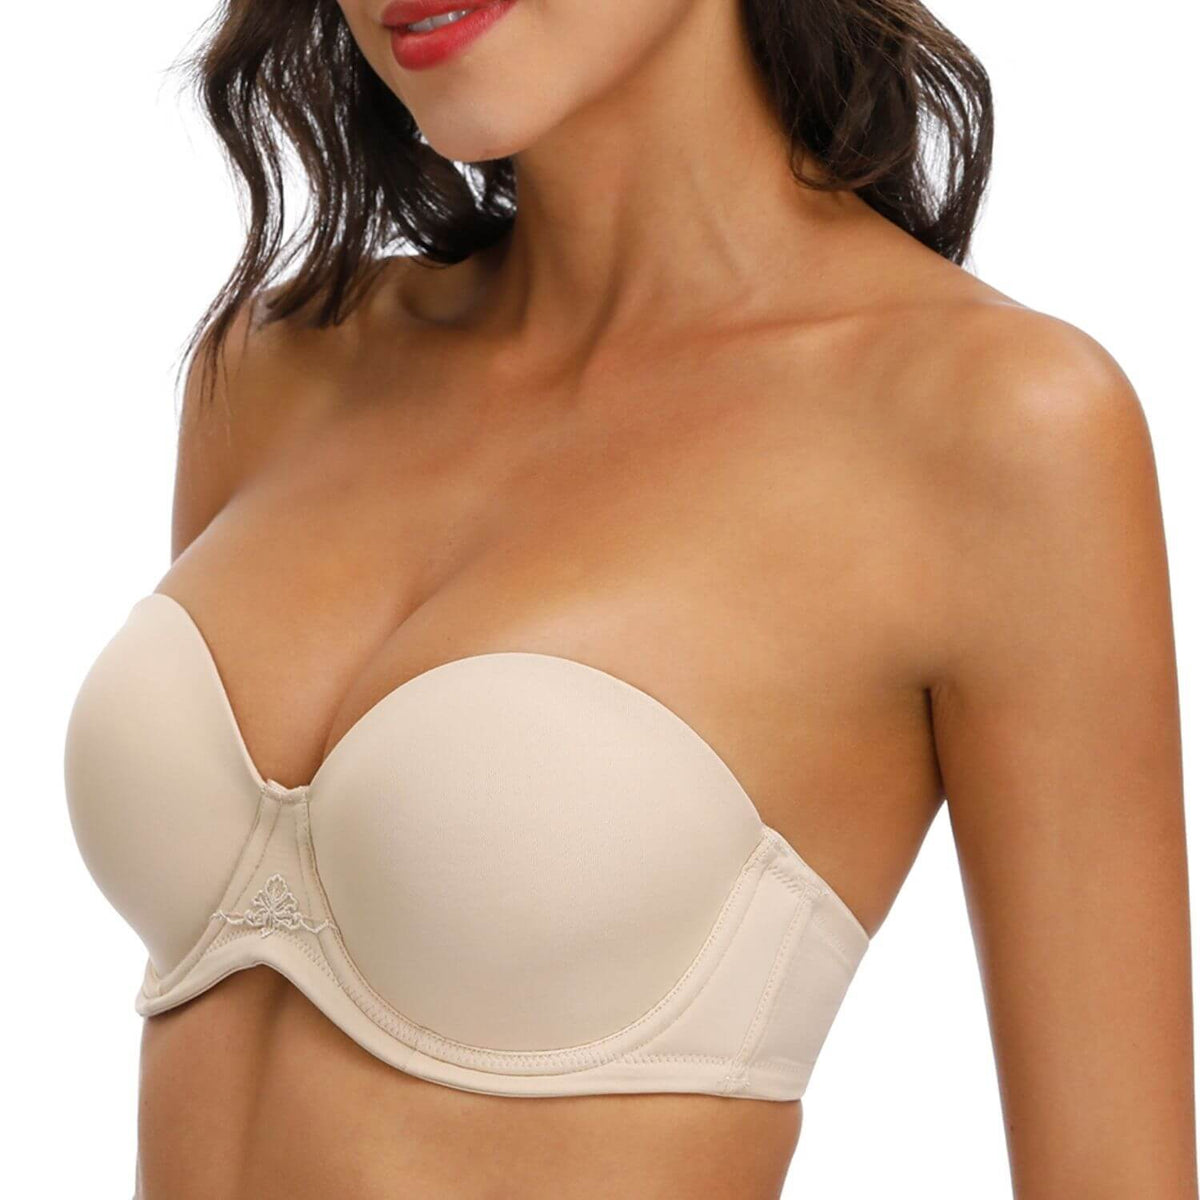 Removable pads bandeau bra, Miiyu, Bandeau, Strapless, and Convertible  Bras